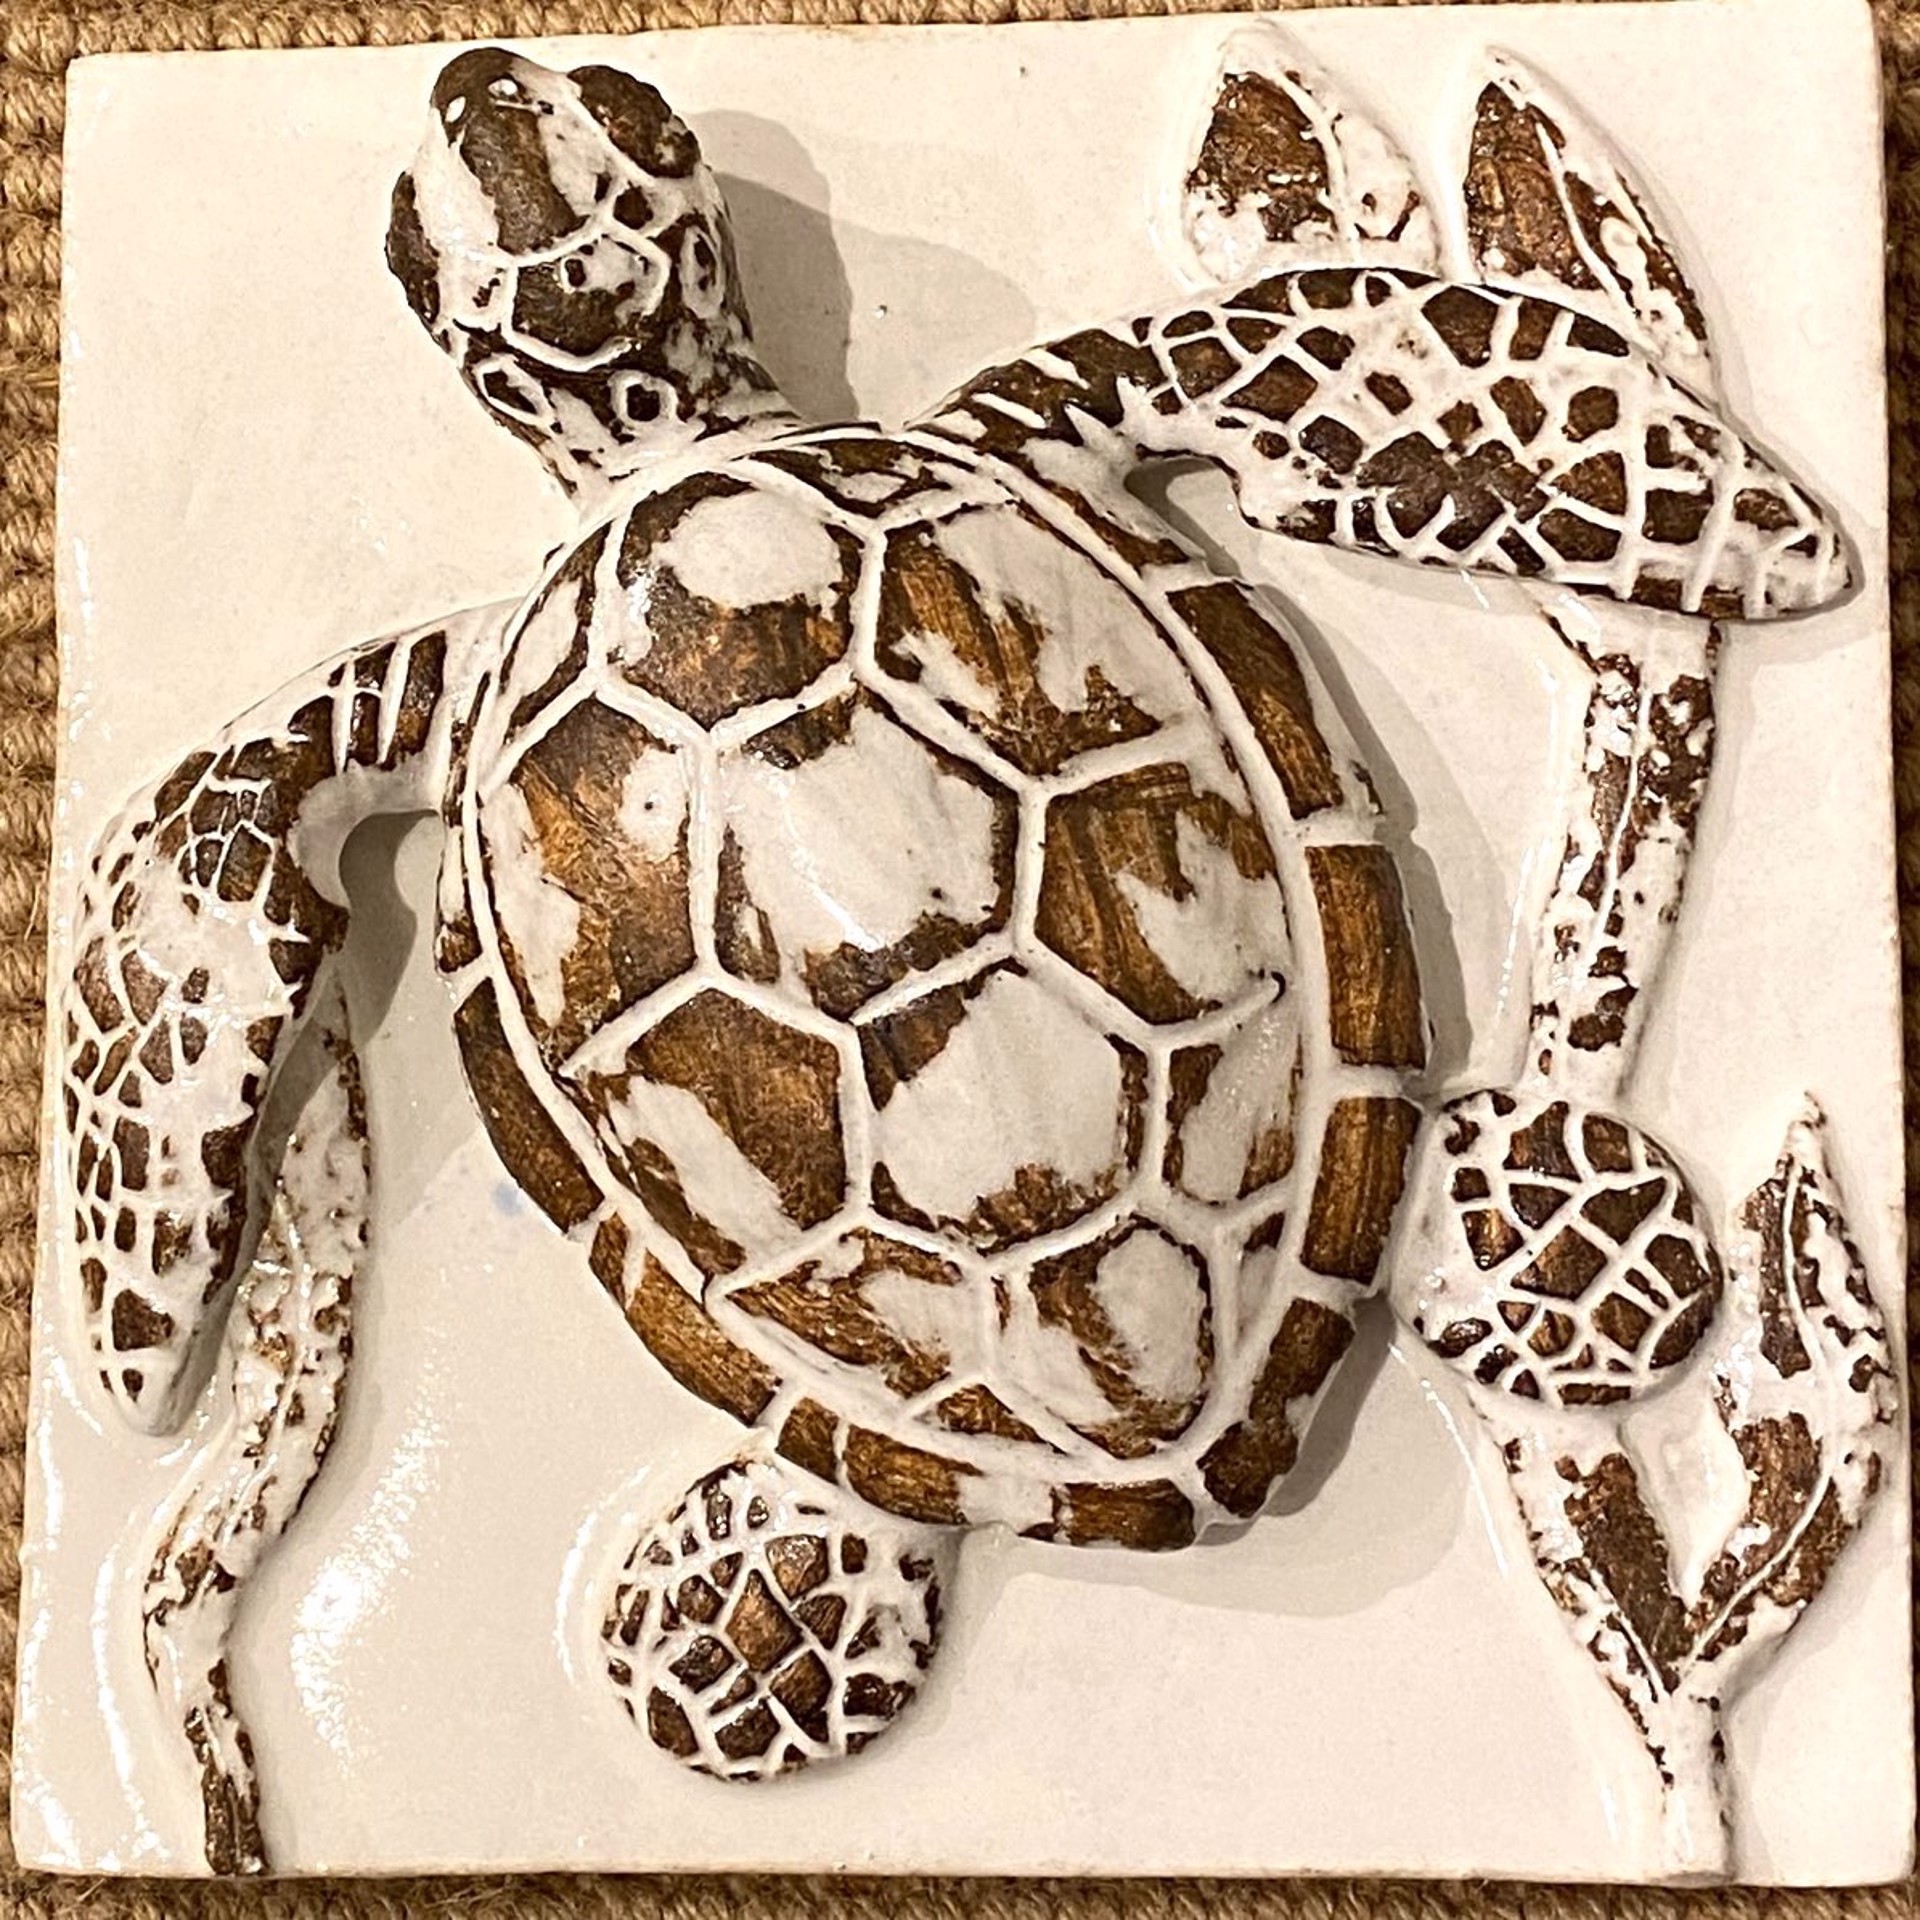 Turtle Tile by Shayne Greco